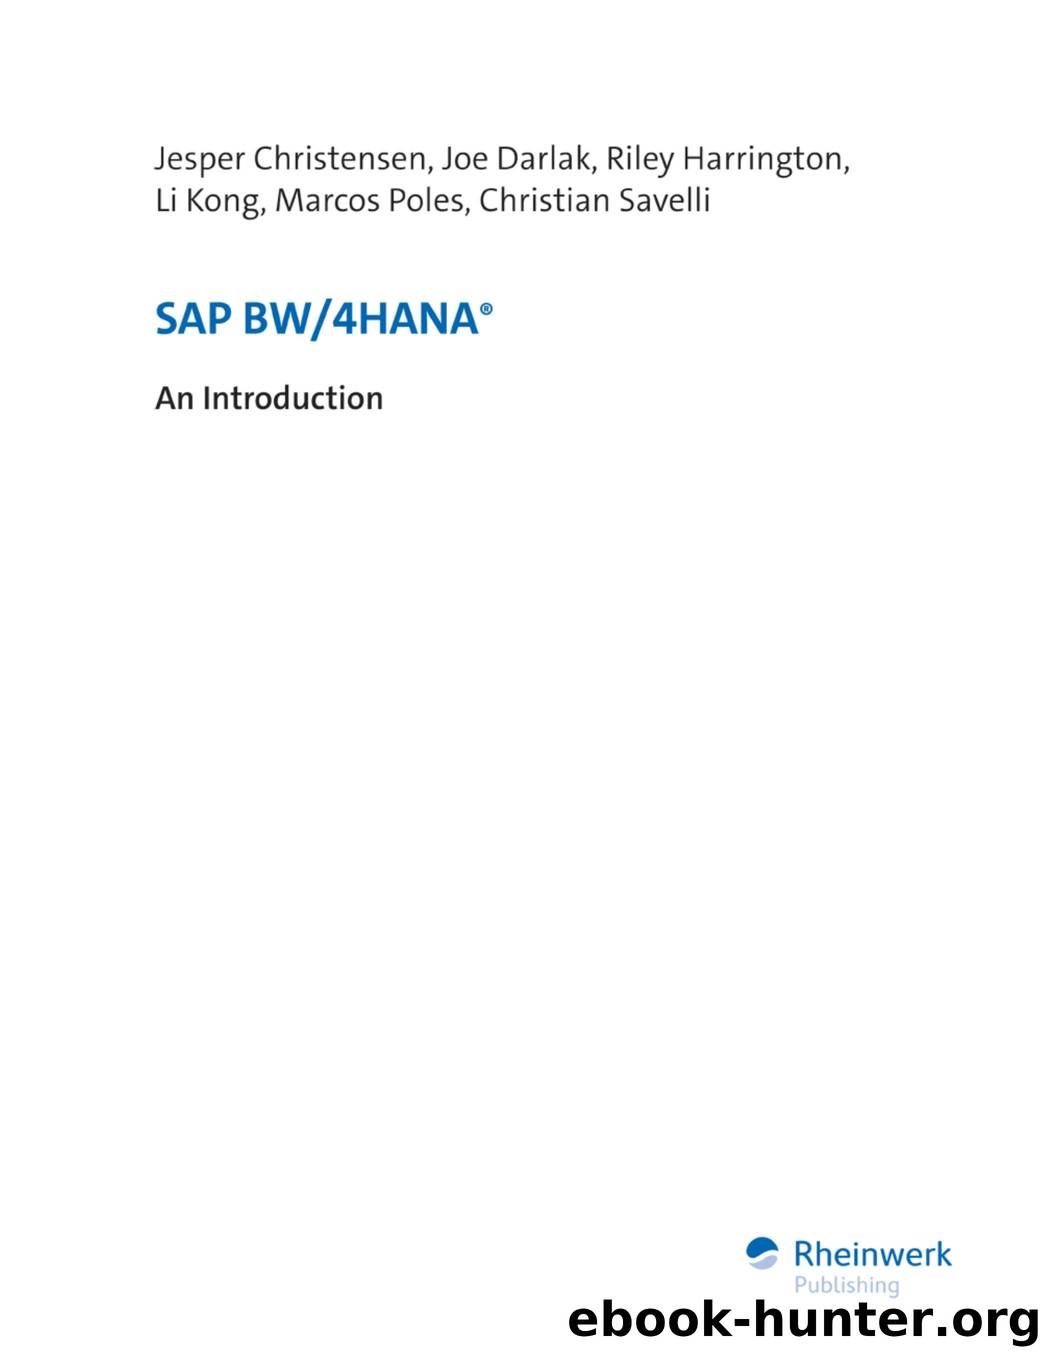 SAP BW4HANA An Introduction by Unknown